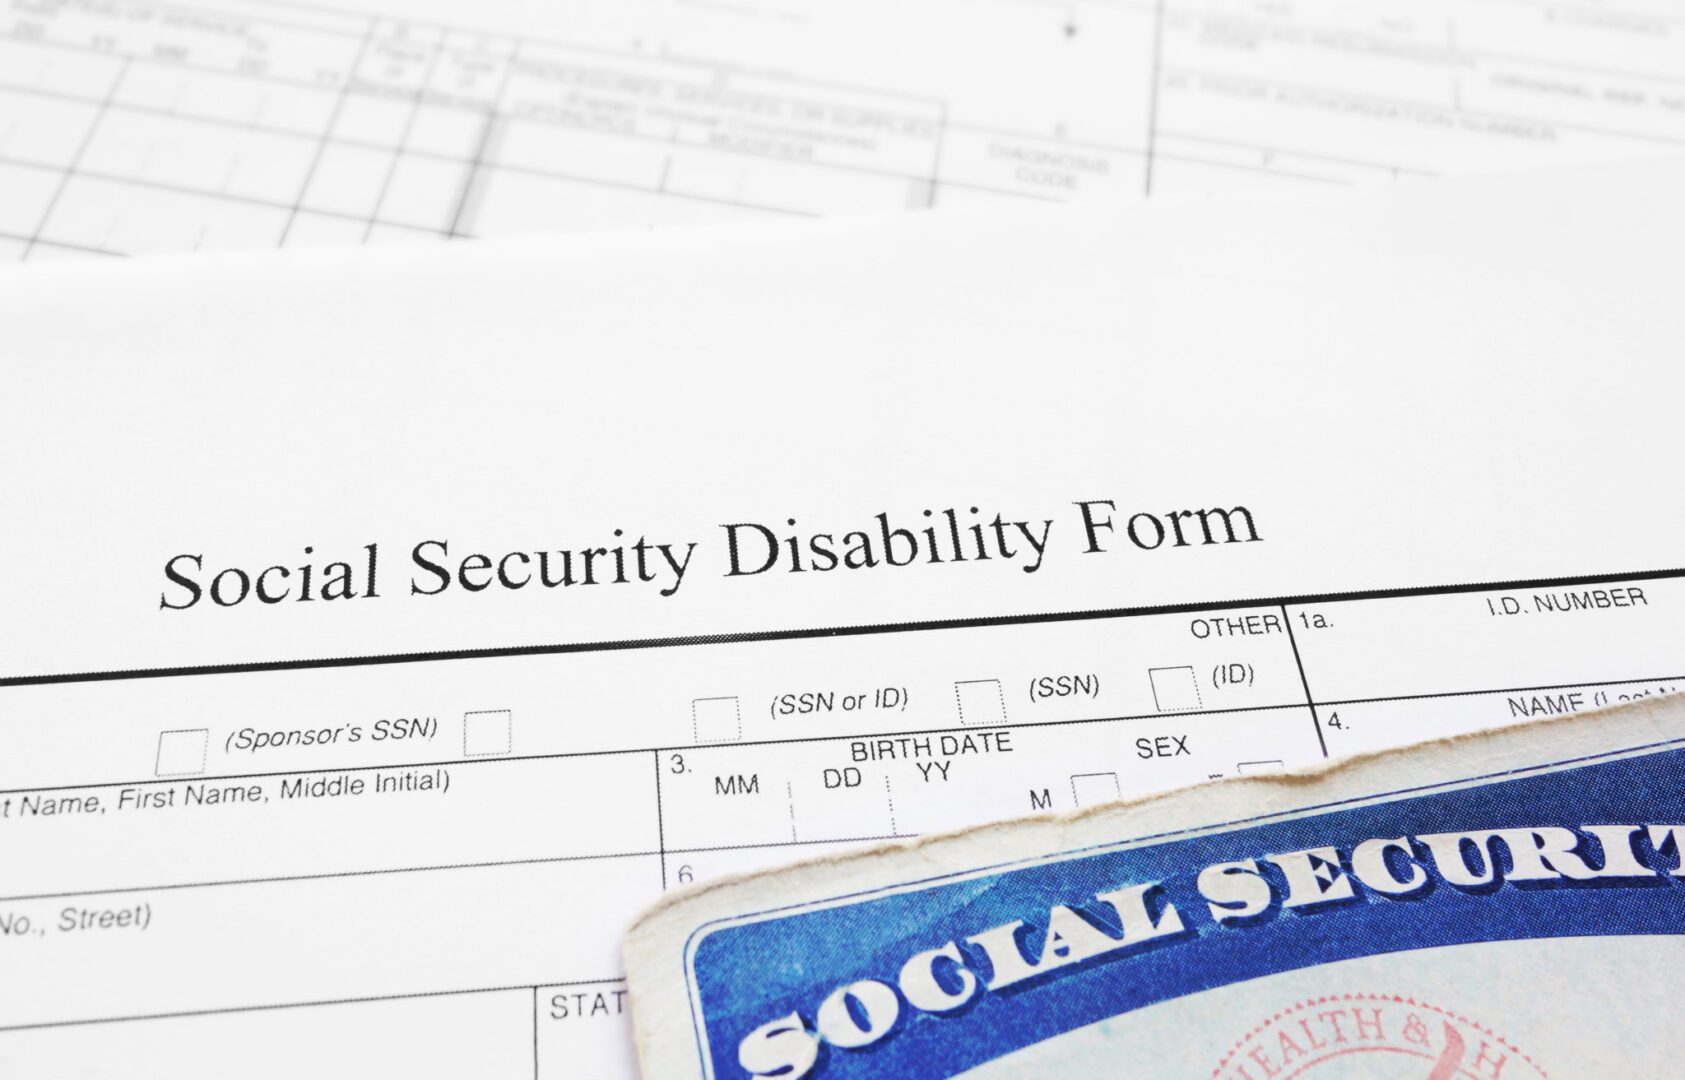 A social security disability form and an id.